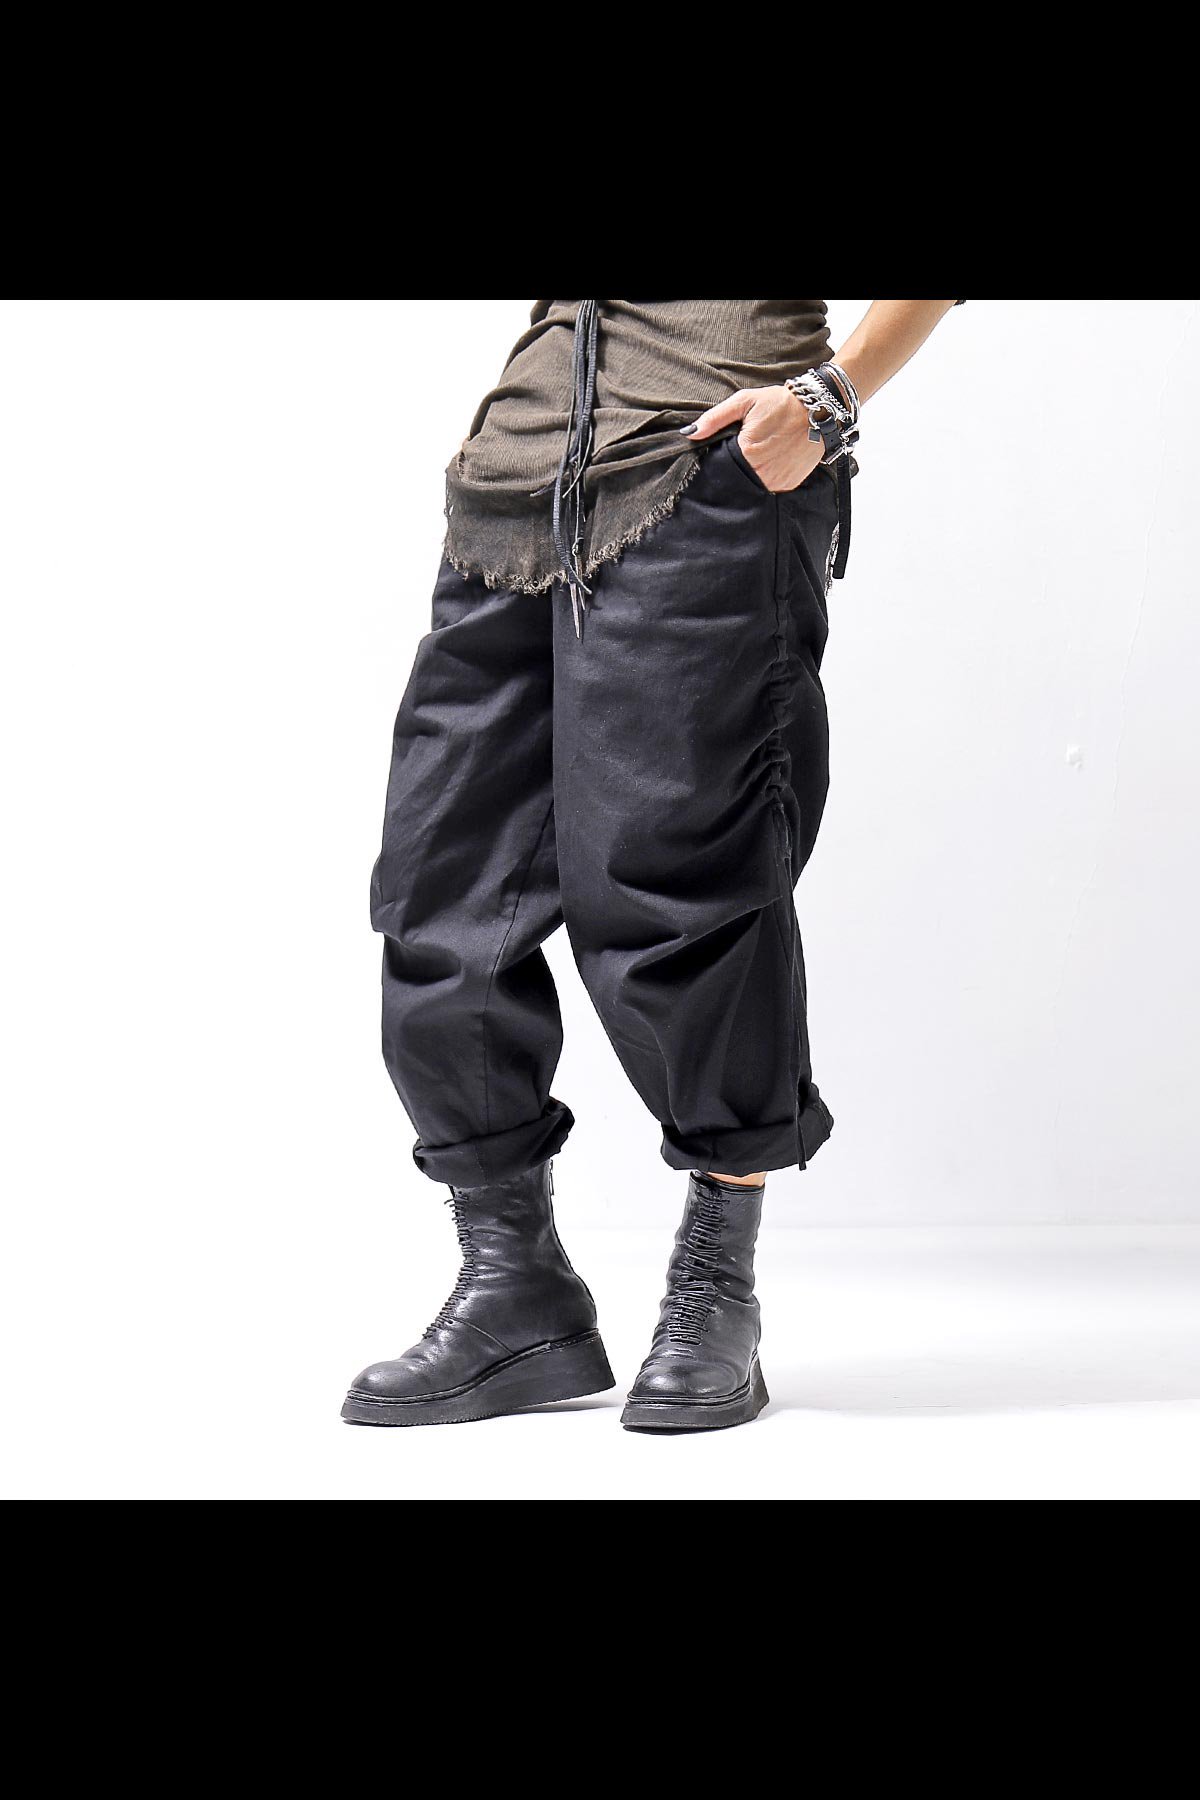 <img class='new_mark_img1' src='https://img.shop-pro.jp/img/new/icons8.gif' style='border:none;display:inline;margin:0px;padding:0px;width:auto;' />UNISEX SIDE STRING CODE PANTS 319/MM_BLACK